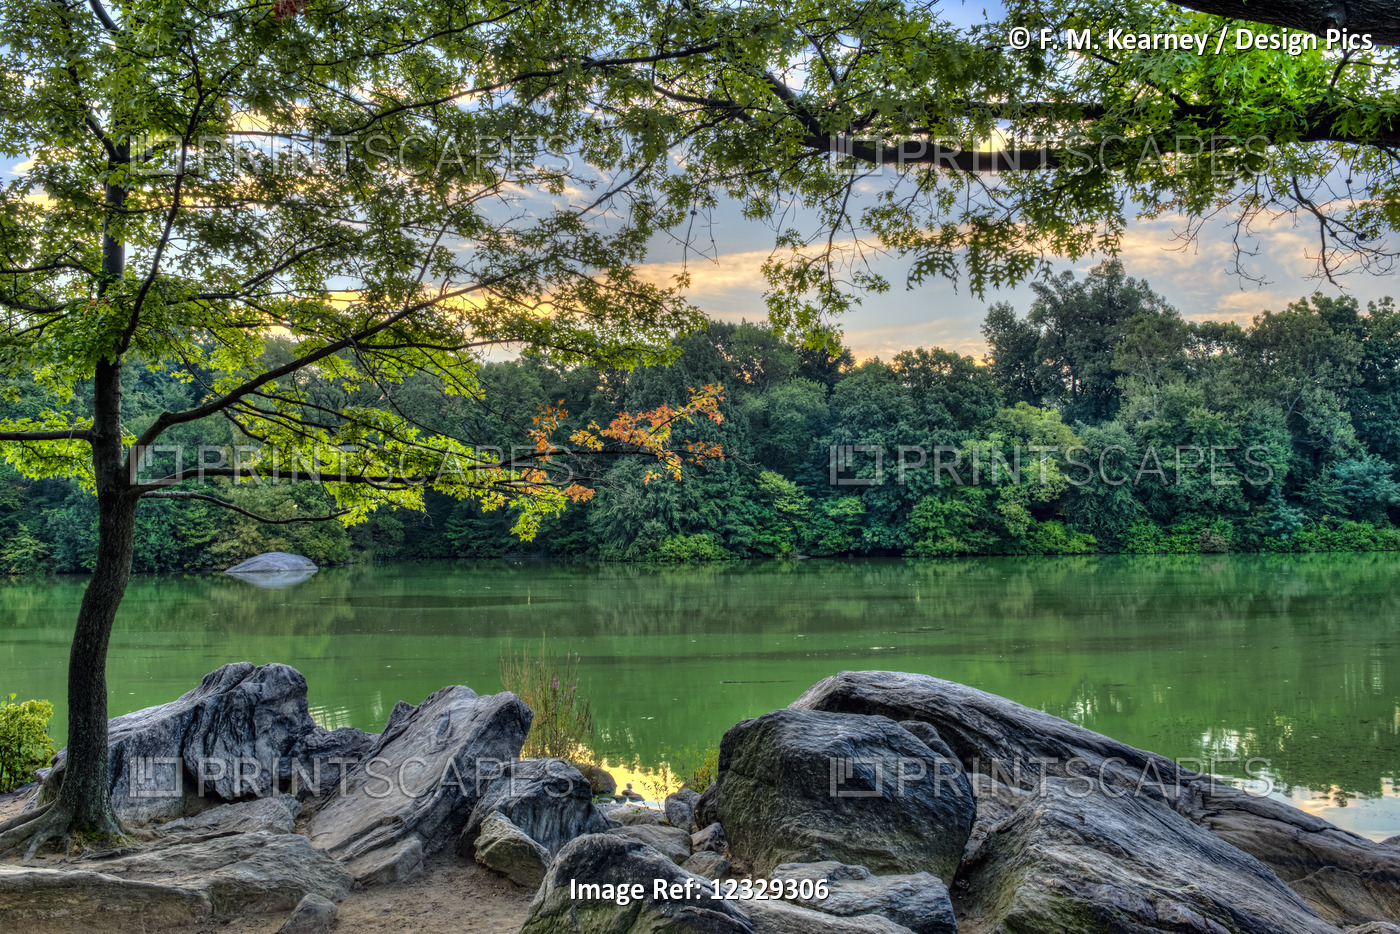 The Lake At The Hernshed, Central Park; New York City, New York, United States ...